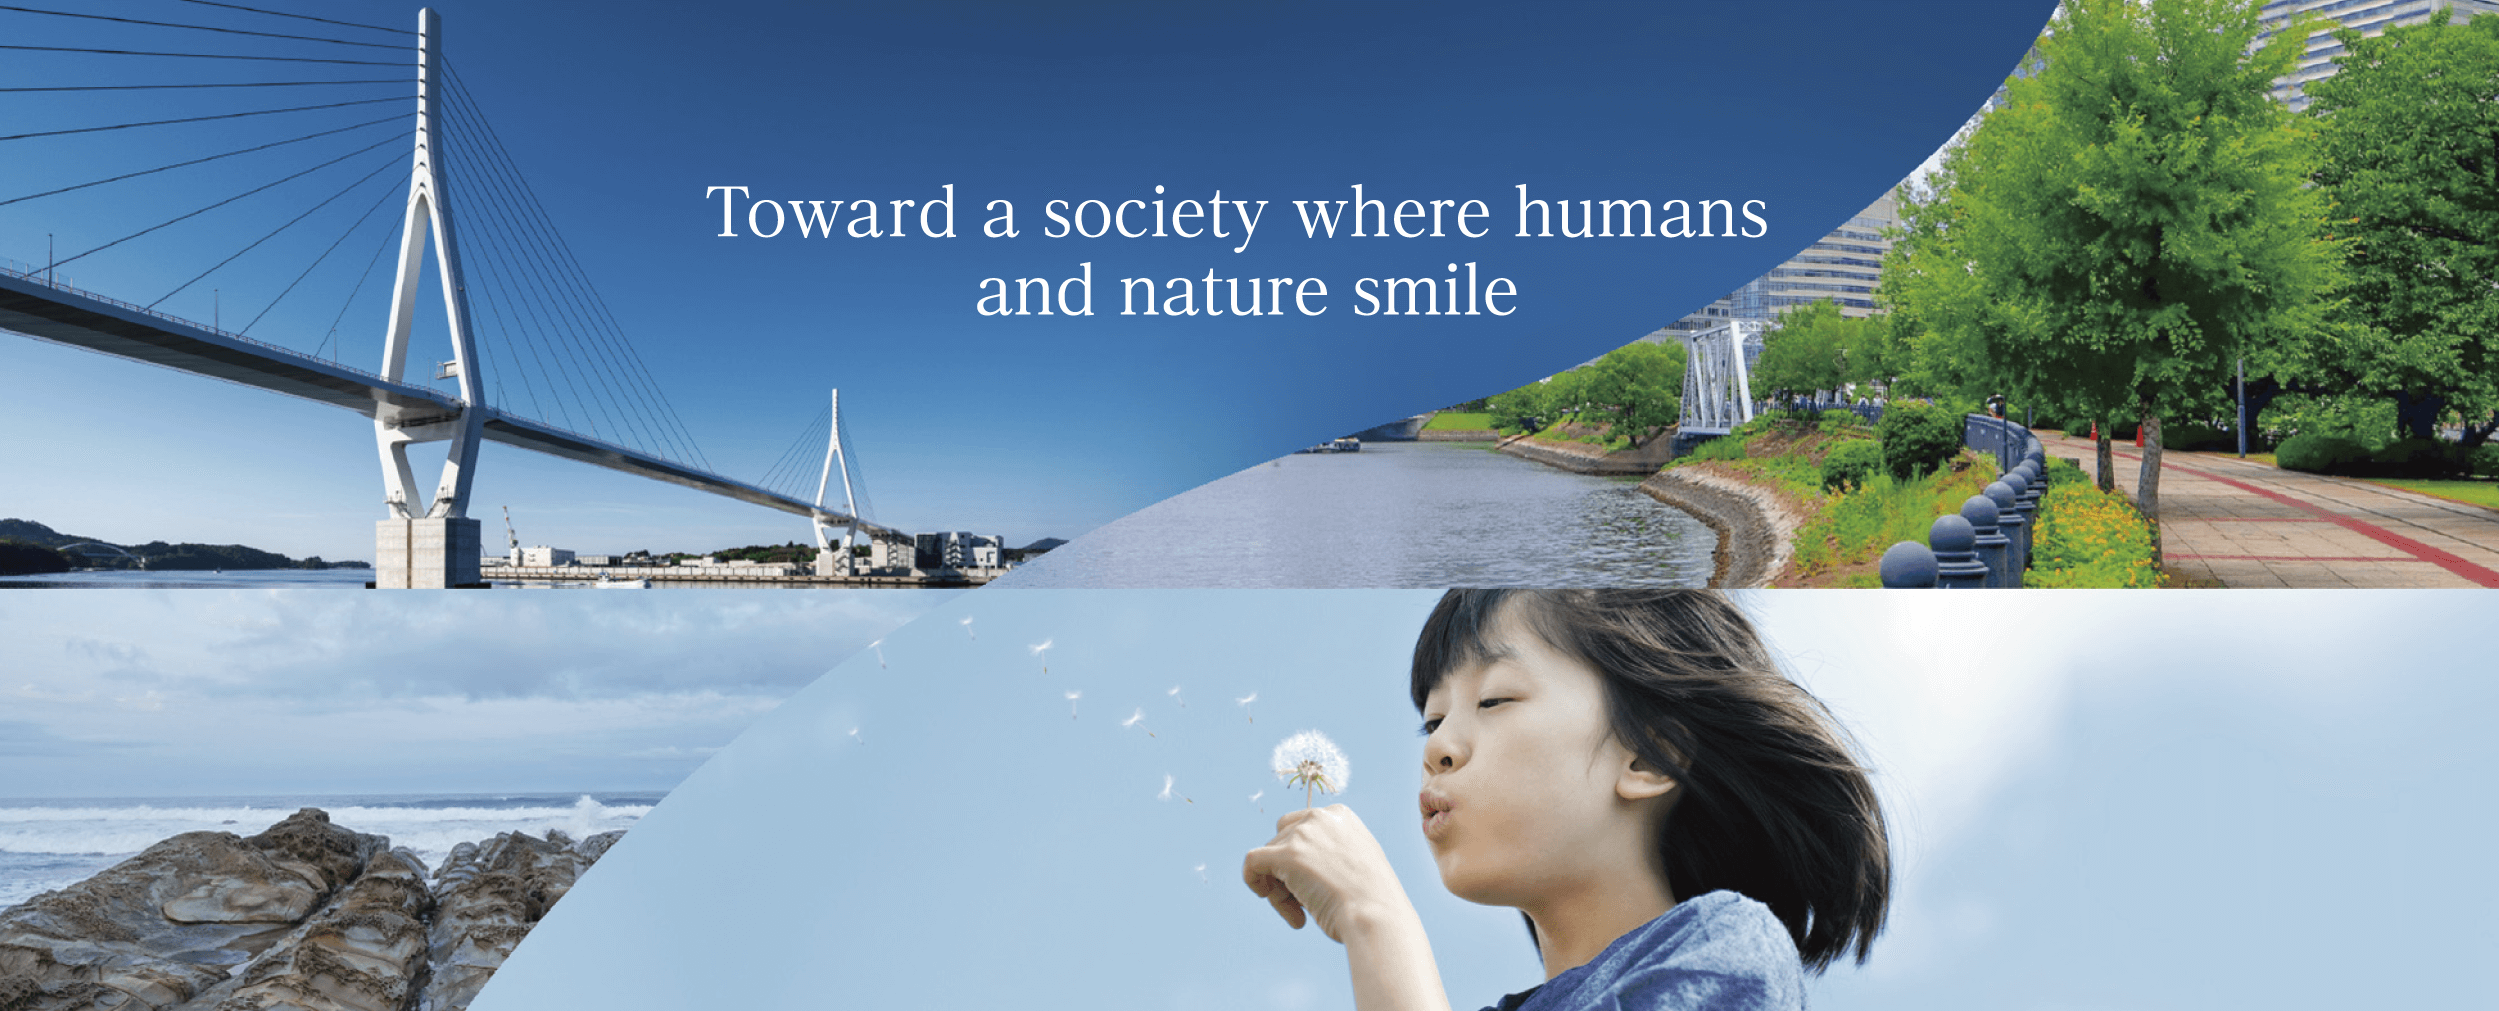 Toward a society where humans and nature smile